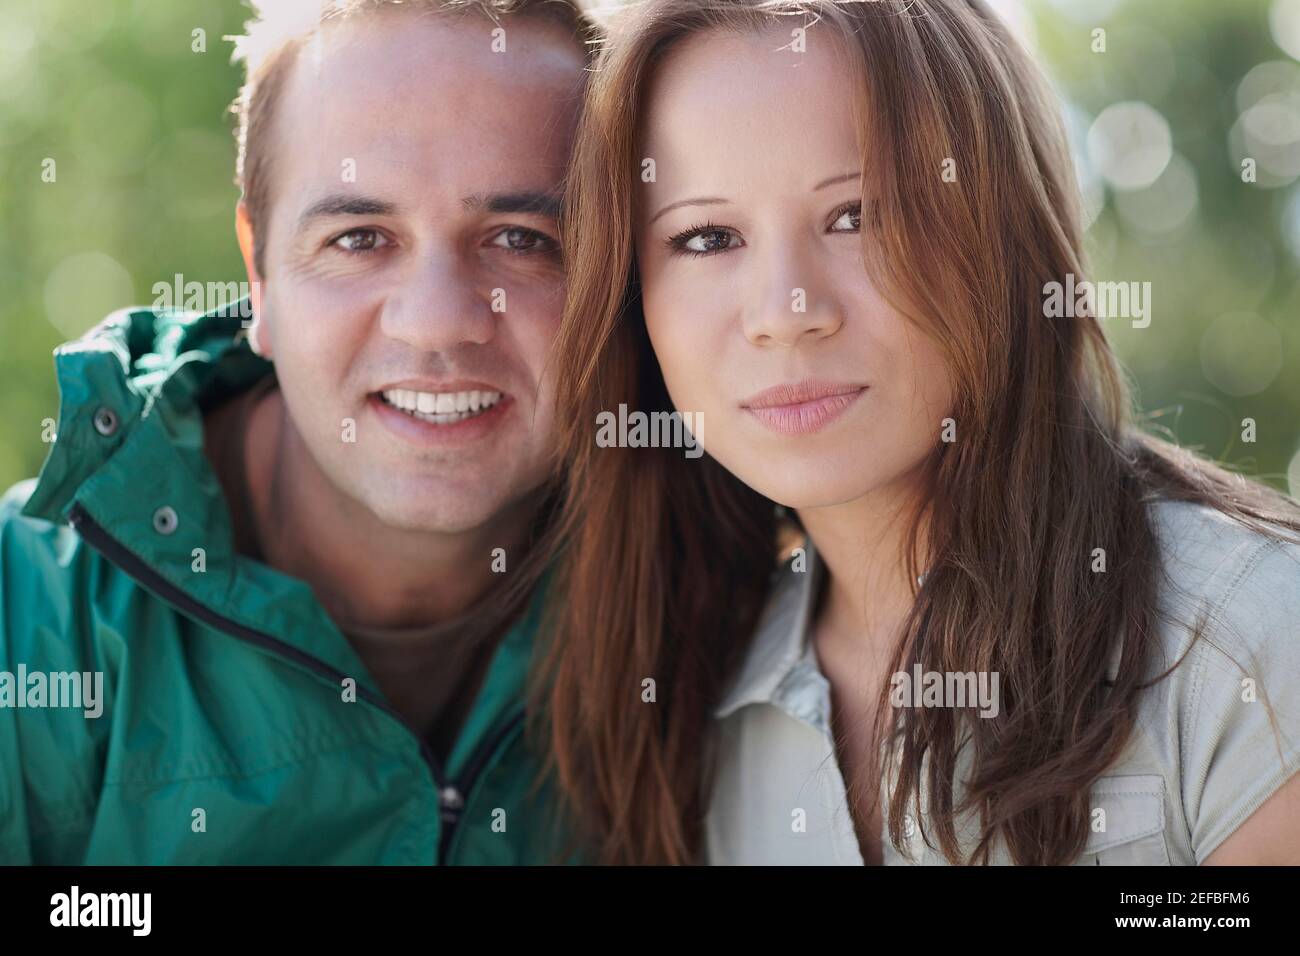 Portrait of a mid adult man and a young woman smiling Stock Photo